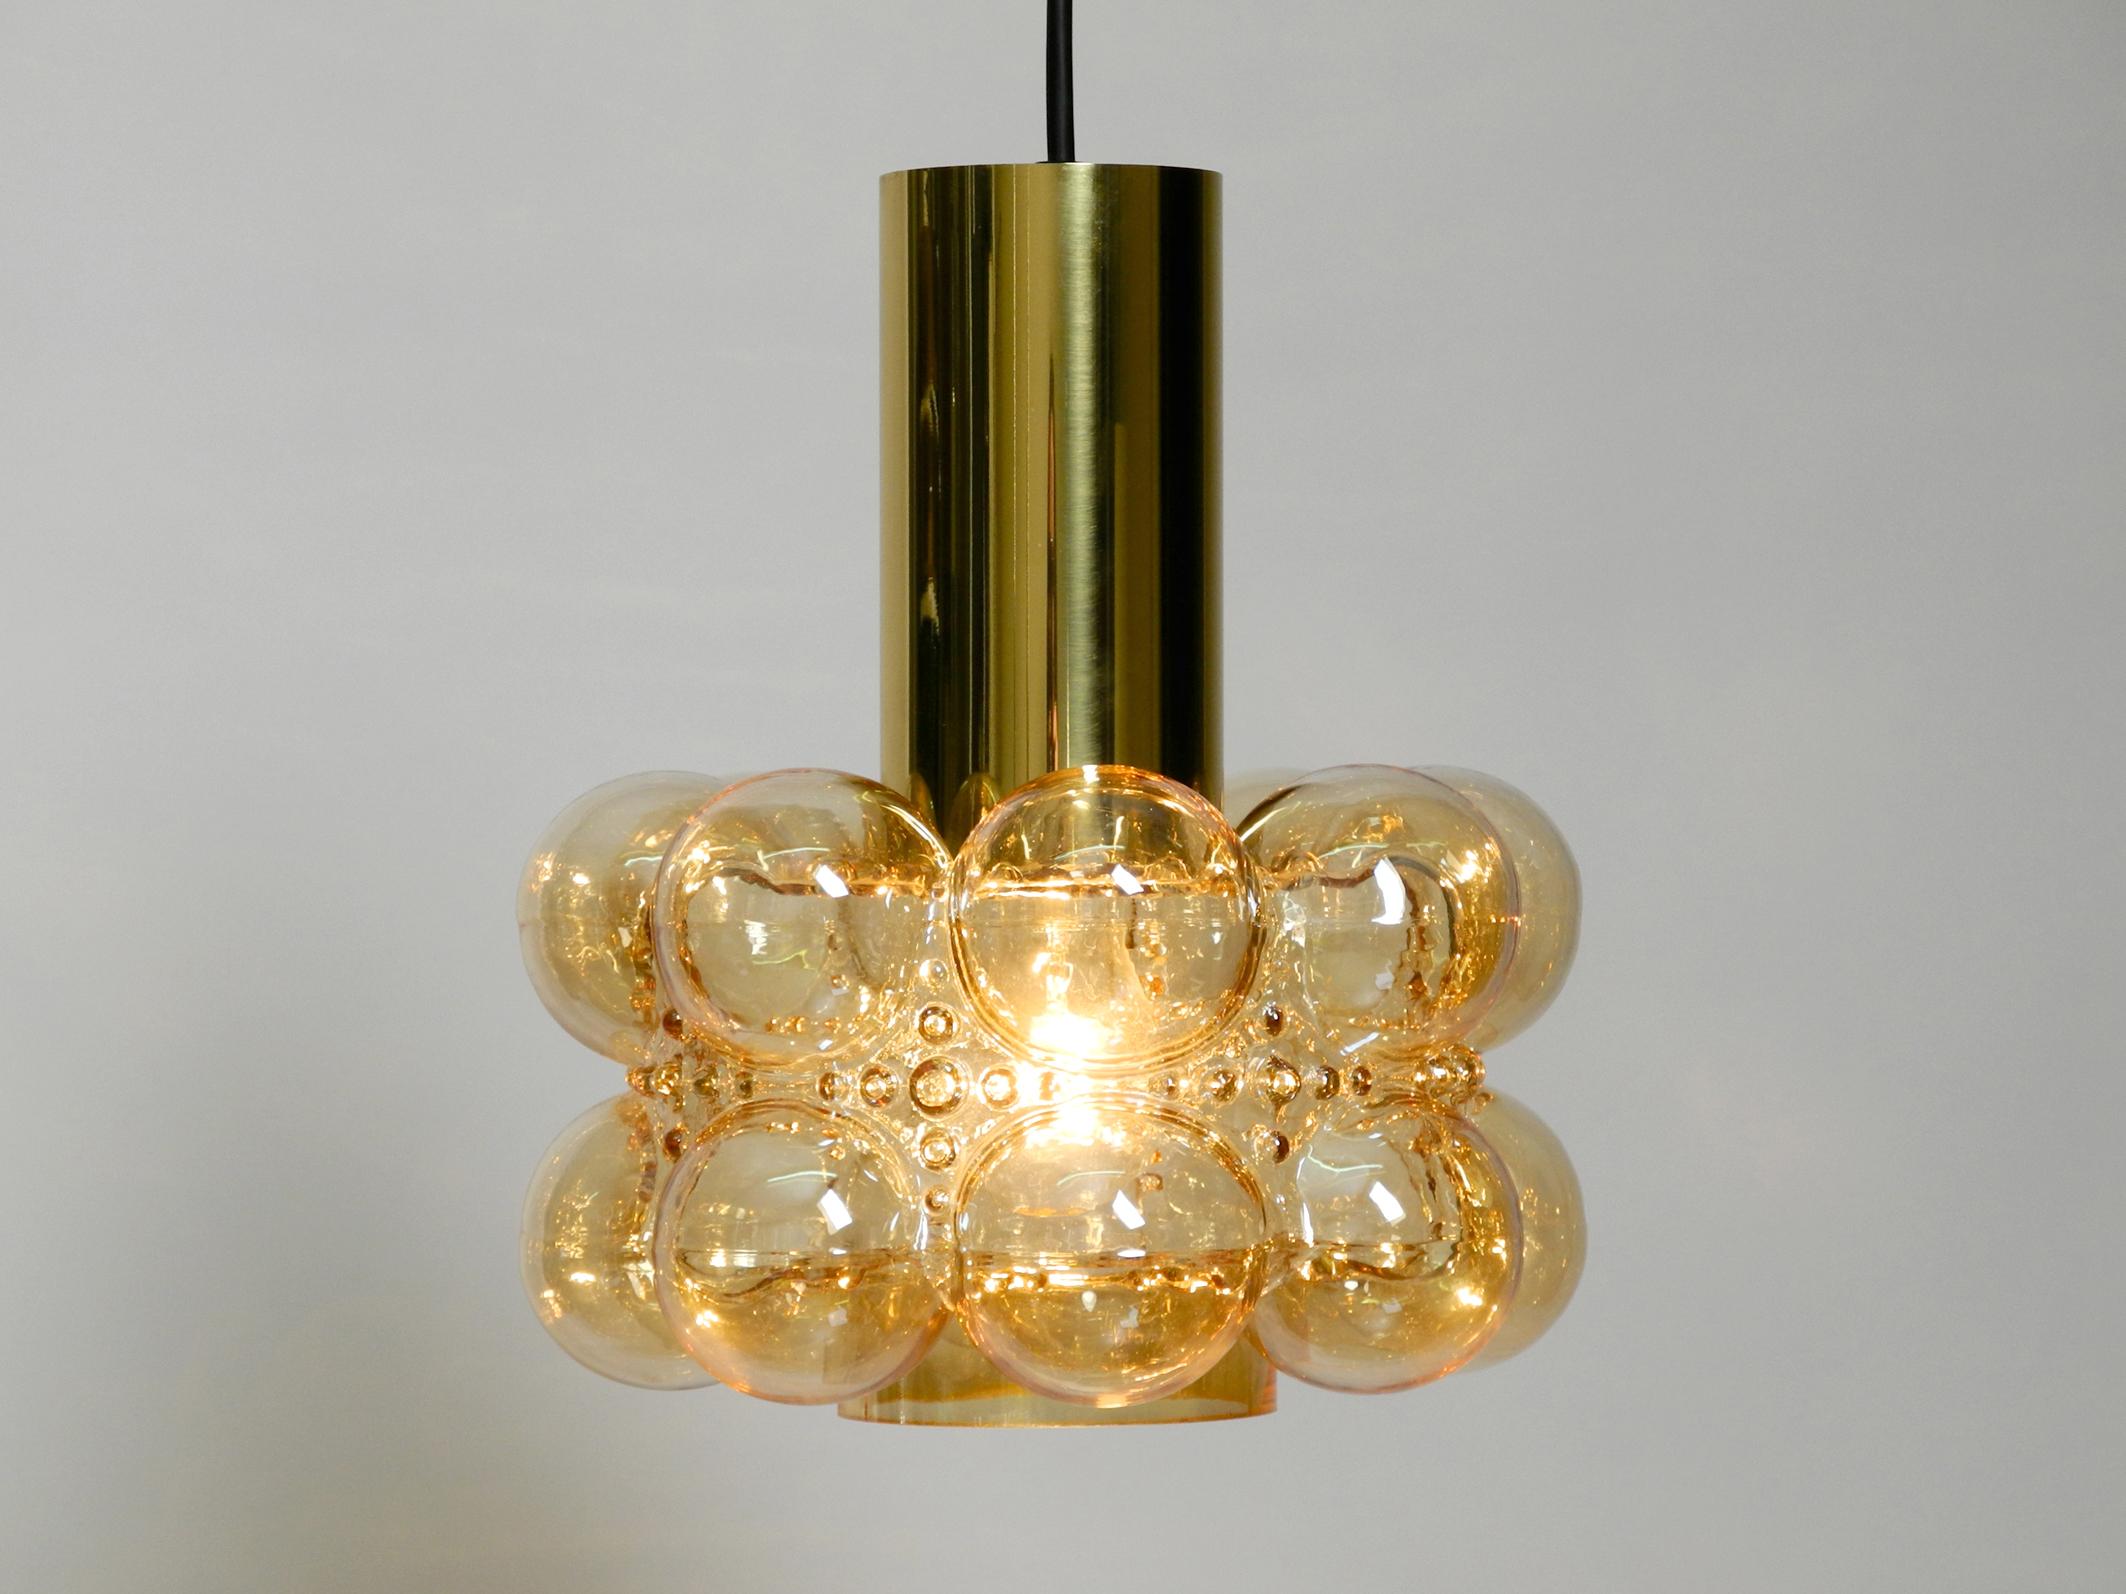 Beautiful large midcentury bubble glass pendant ceiling lamp by Helena Tynell for Limburg.
Creates a beautiful warm light for all rooms.
In almost new condition with no damages. The attachment above the glass shade is made of shiny brass.
Glass